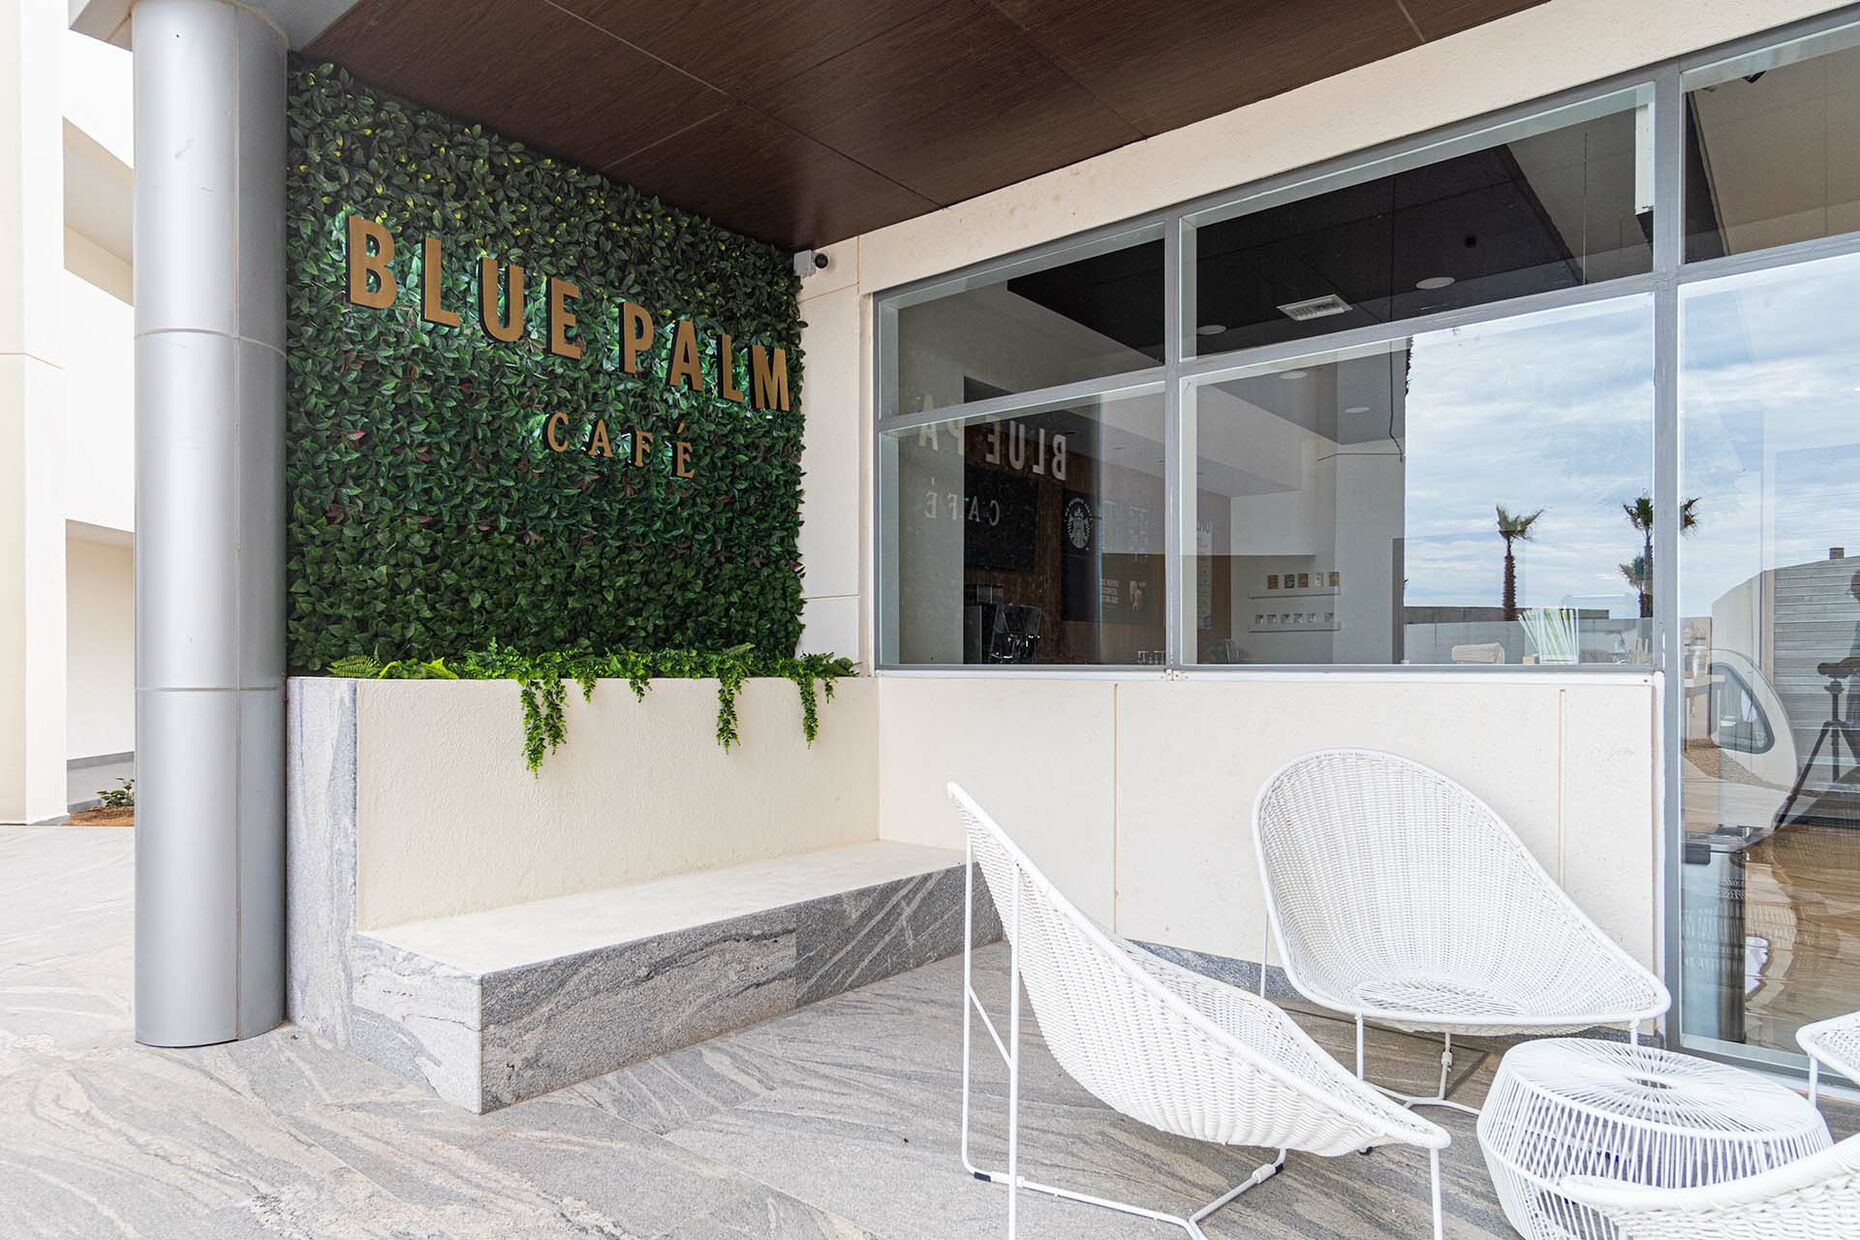 Blue Palm Cafe is a coffee lovers favorite, serving up Starbucks.